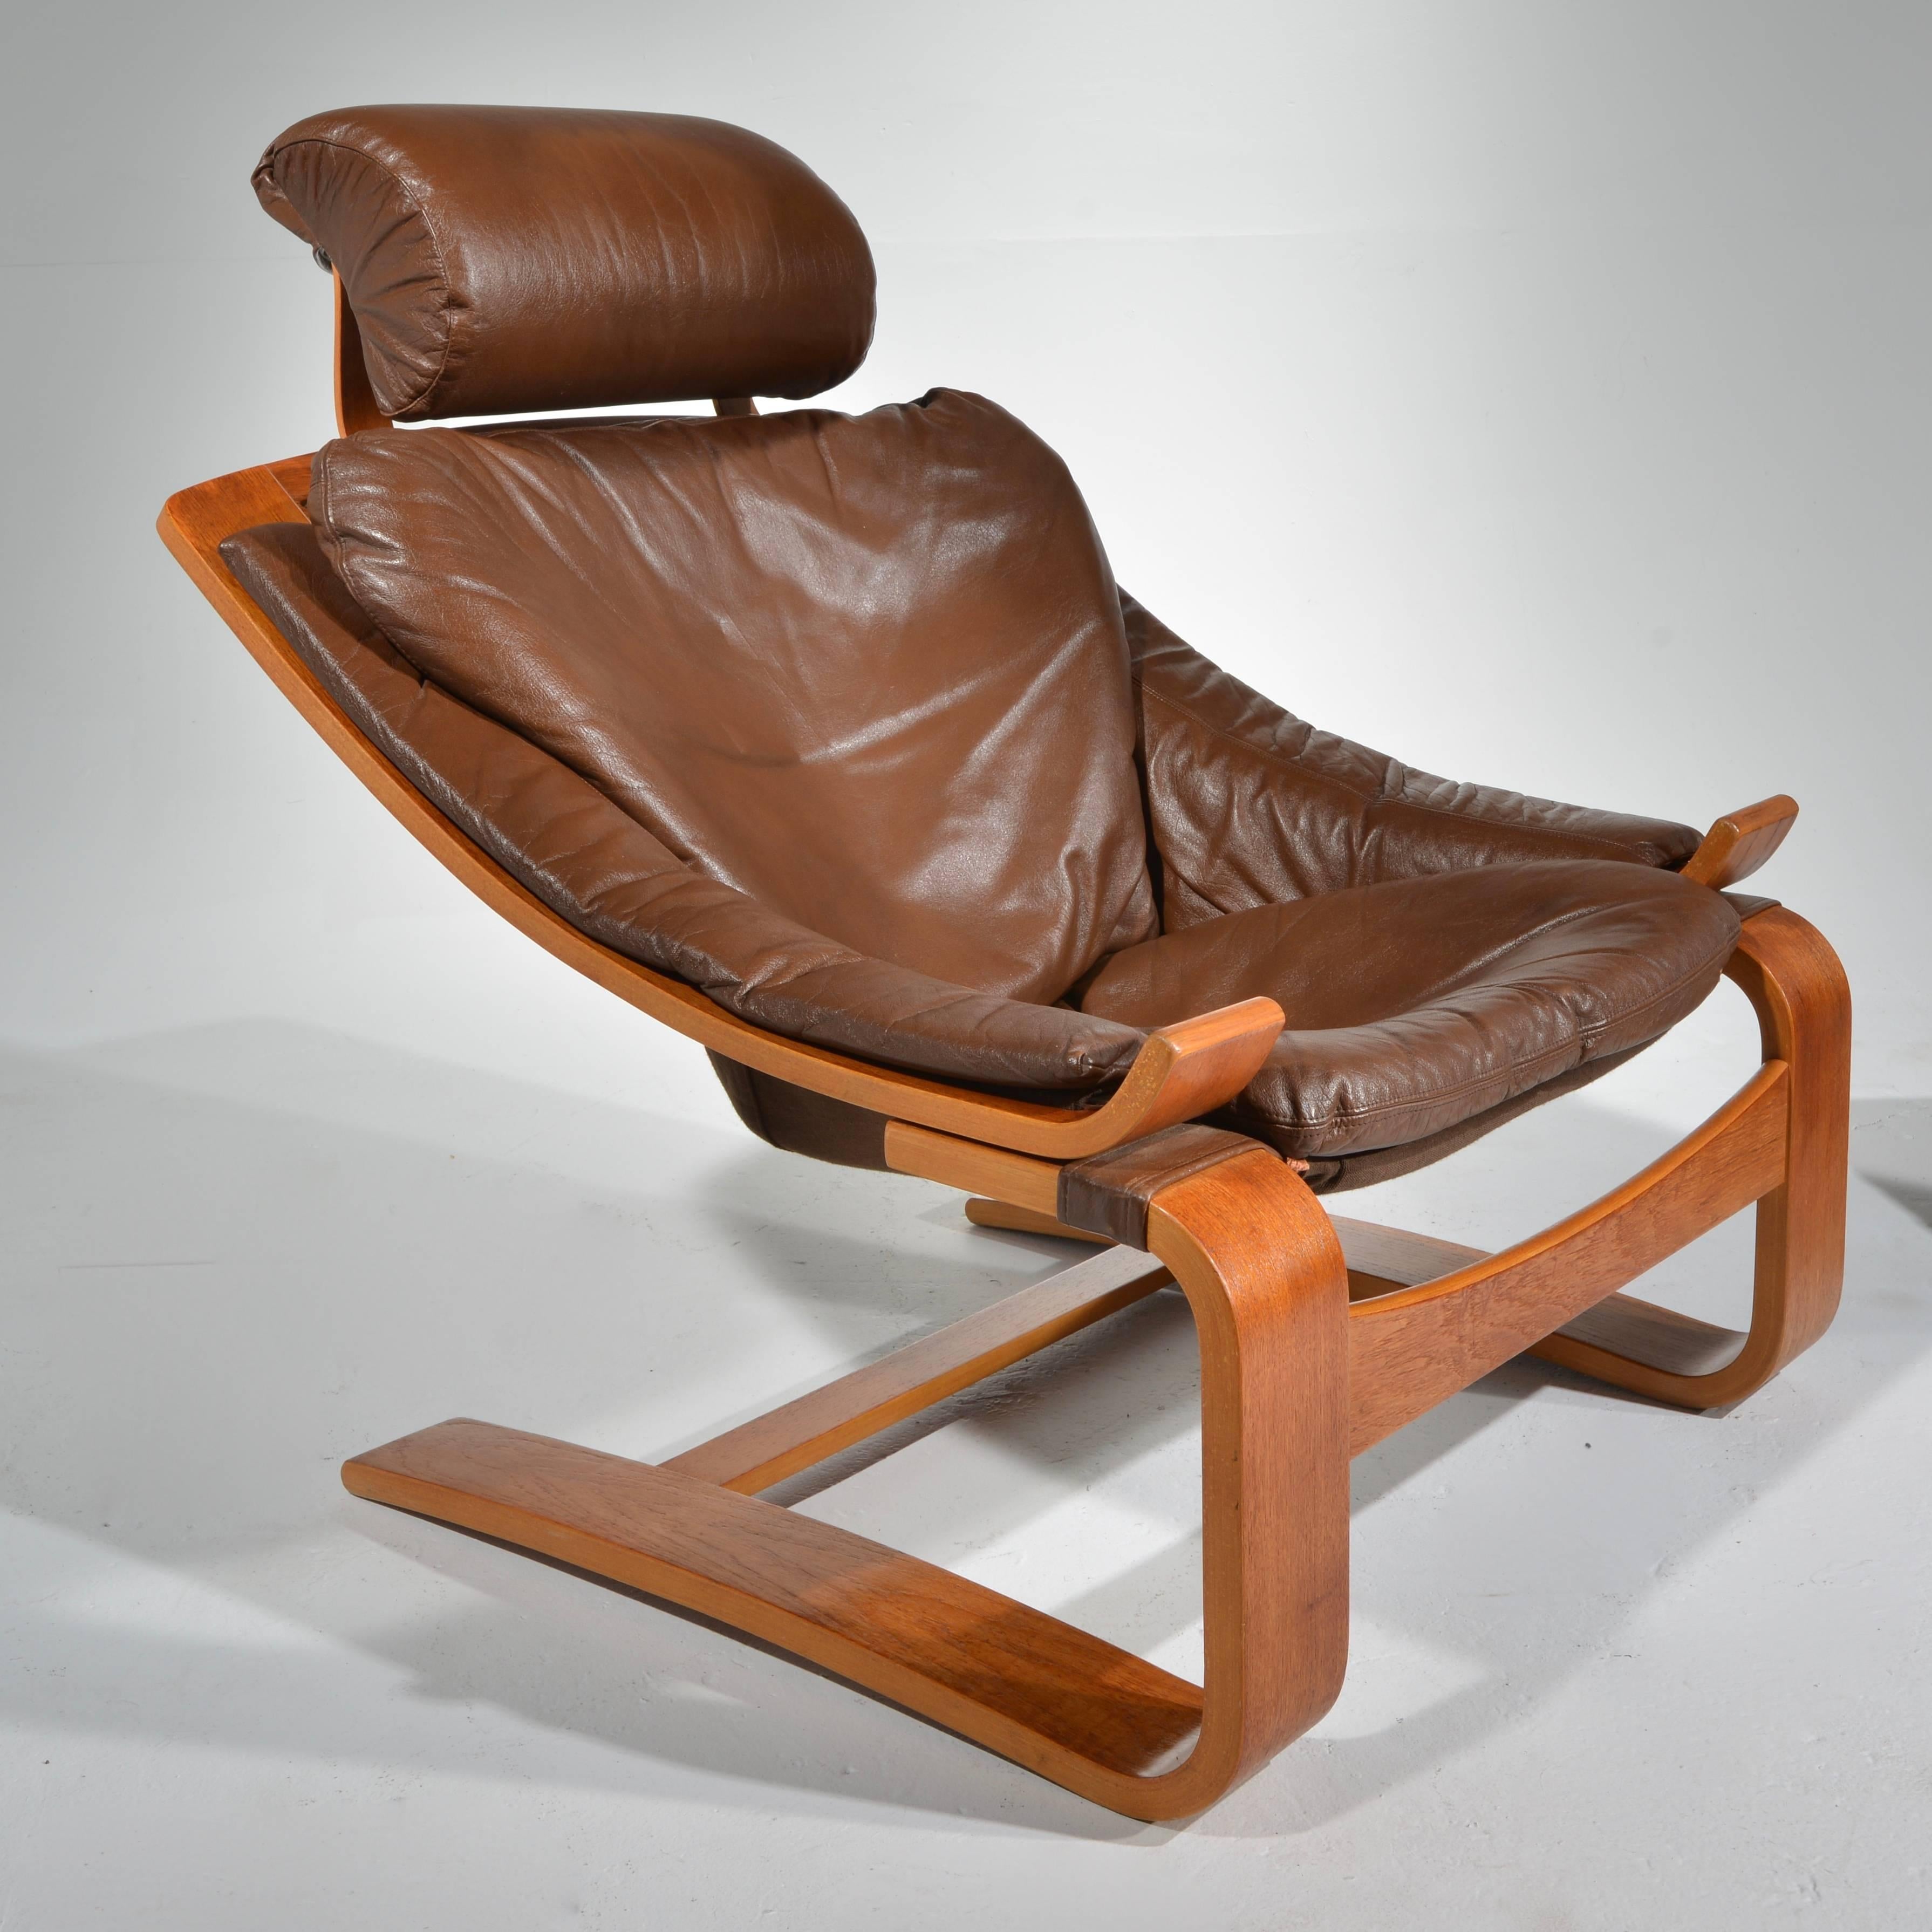 Late 20th Century Kroken Teak and Leather Lounge Chair and Stool by Ake Fribytter for Nelo, Sweden